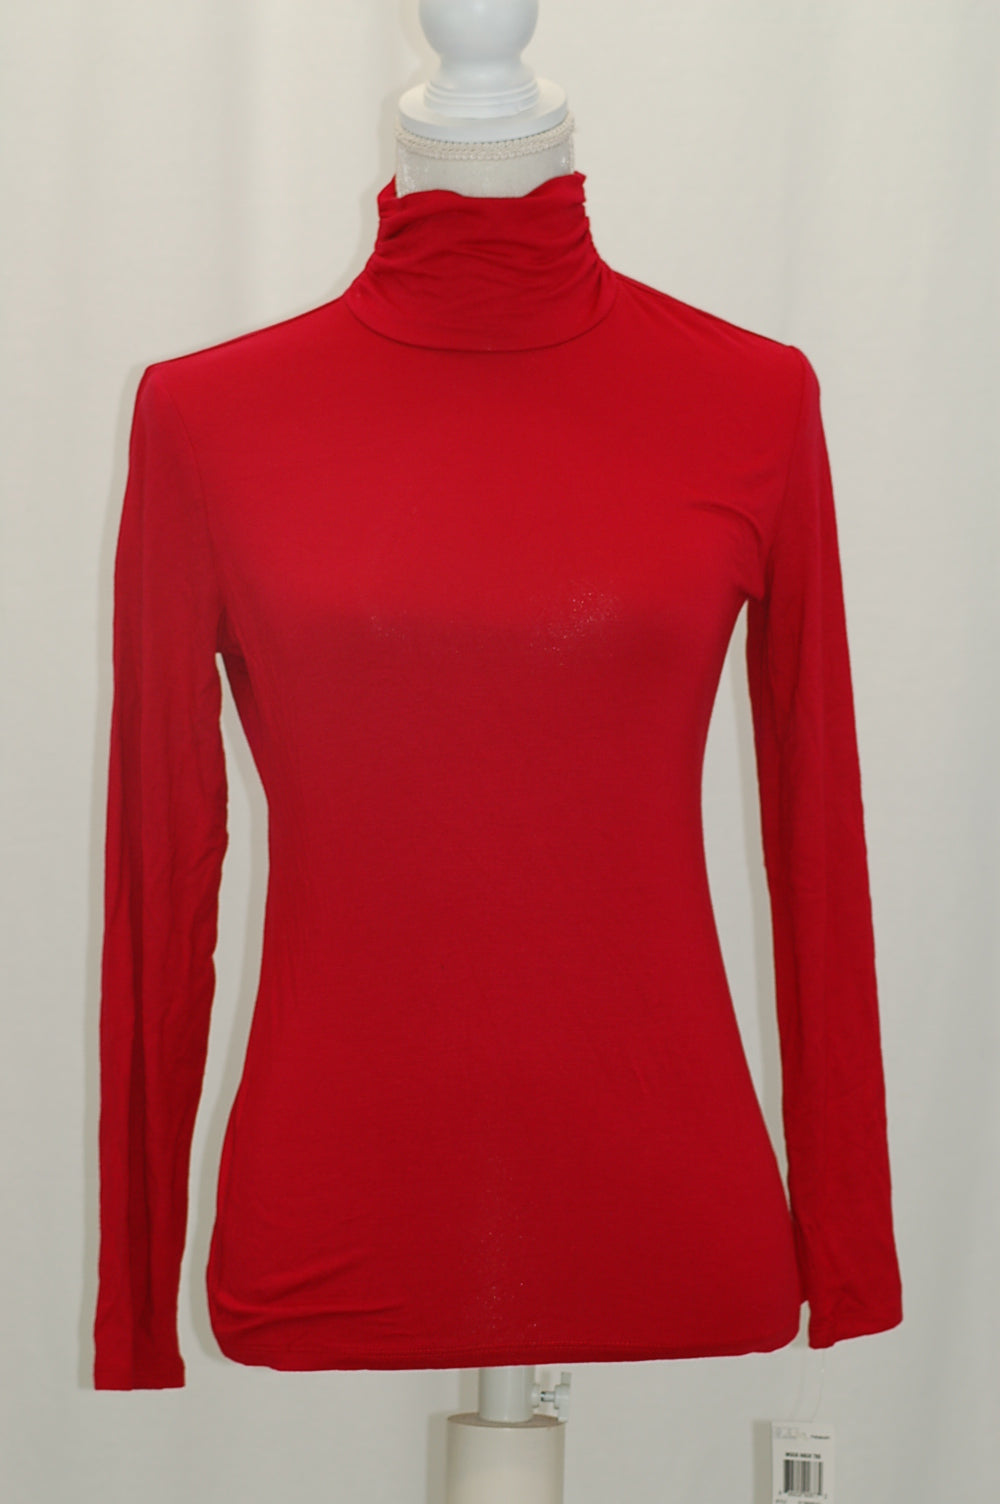 Style Co Petite Top, Long-Sleeve Mock T New Red PM